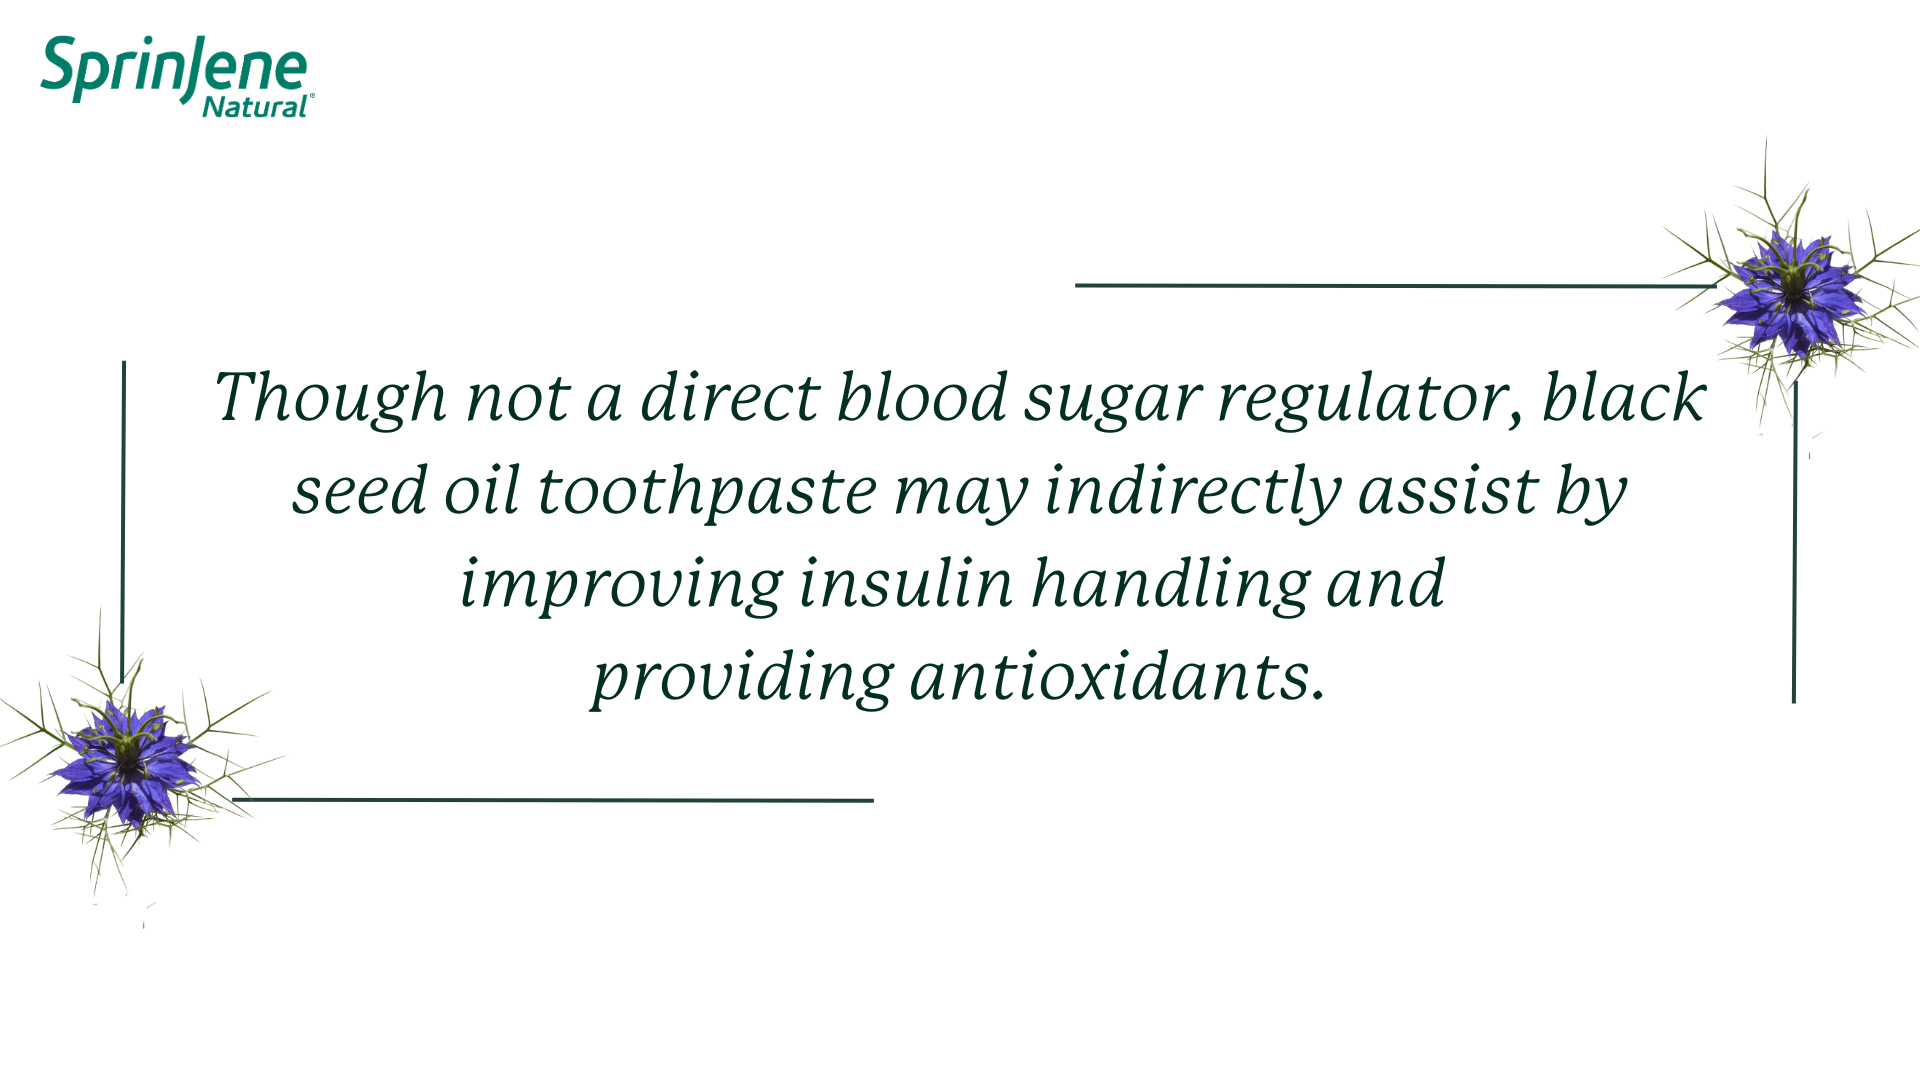 Though not a direct blood sugar regulator, black seed oil toothpaste may indirectly assist by improving insulin handling and  providing antioxidants.